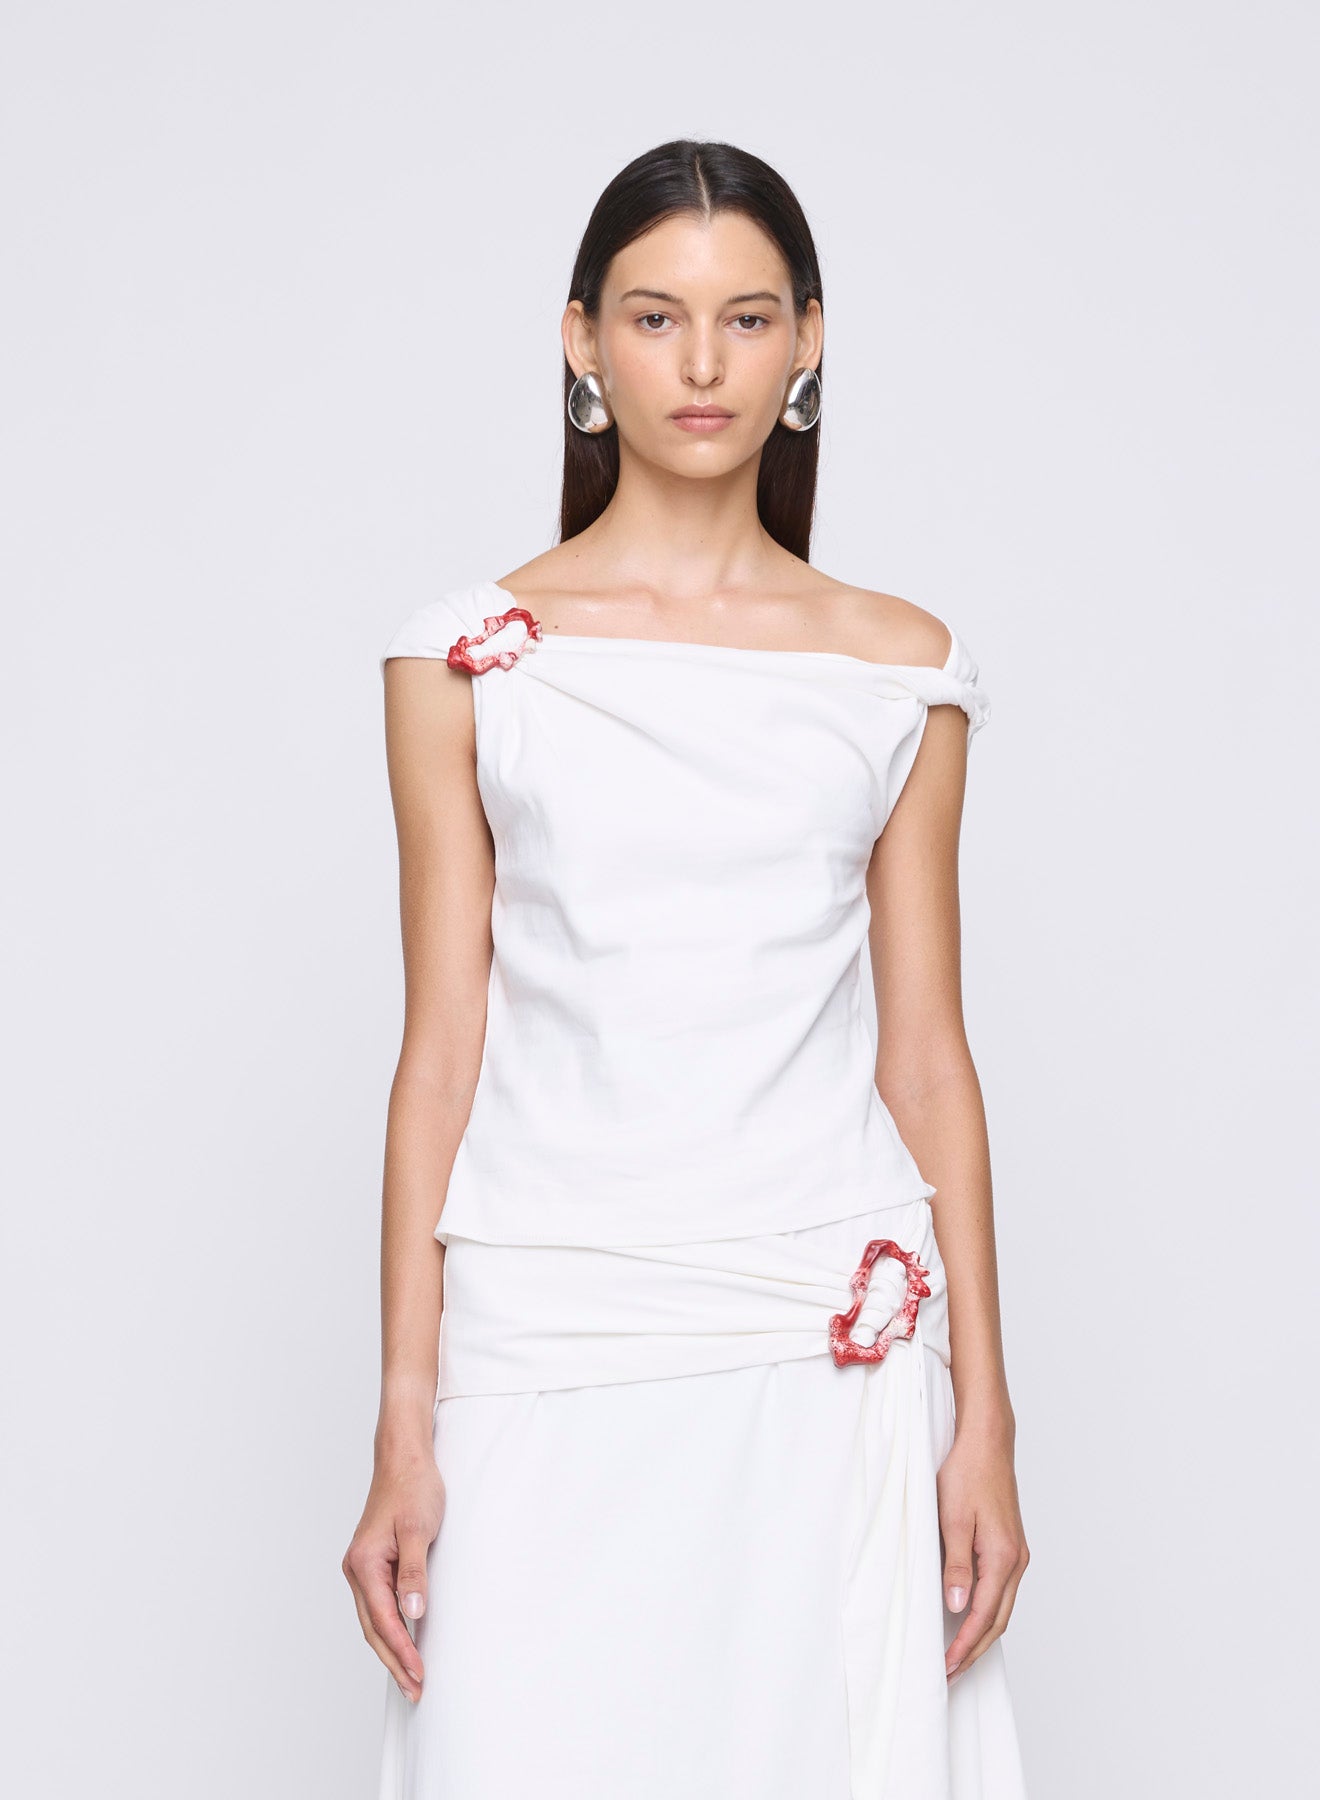 The ANNA QUAN Minkey Top in Ivory Linen features an asymmetrical neckline, cropped length and knot detail with a pop of colour in the curved buckle on the neckline.